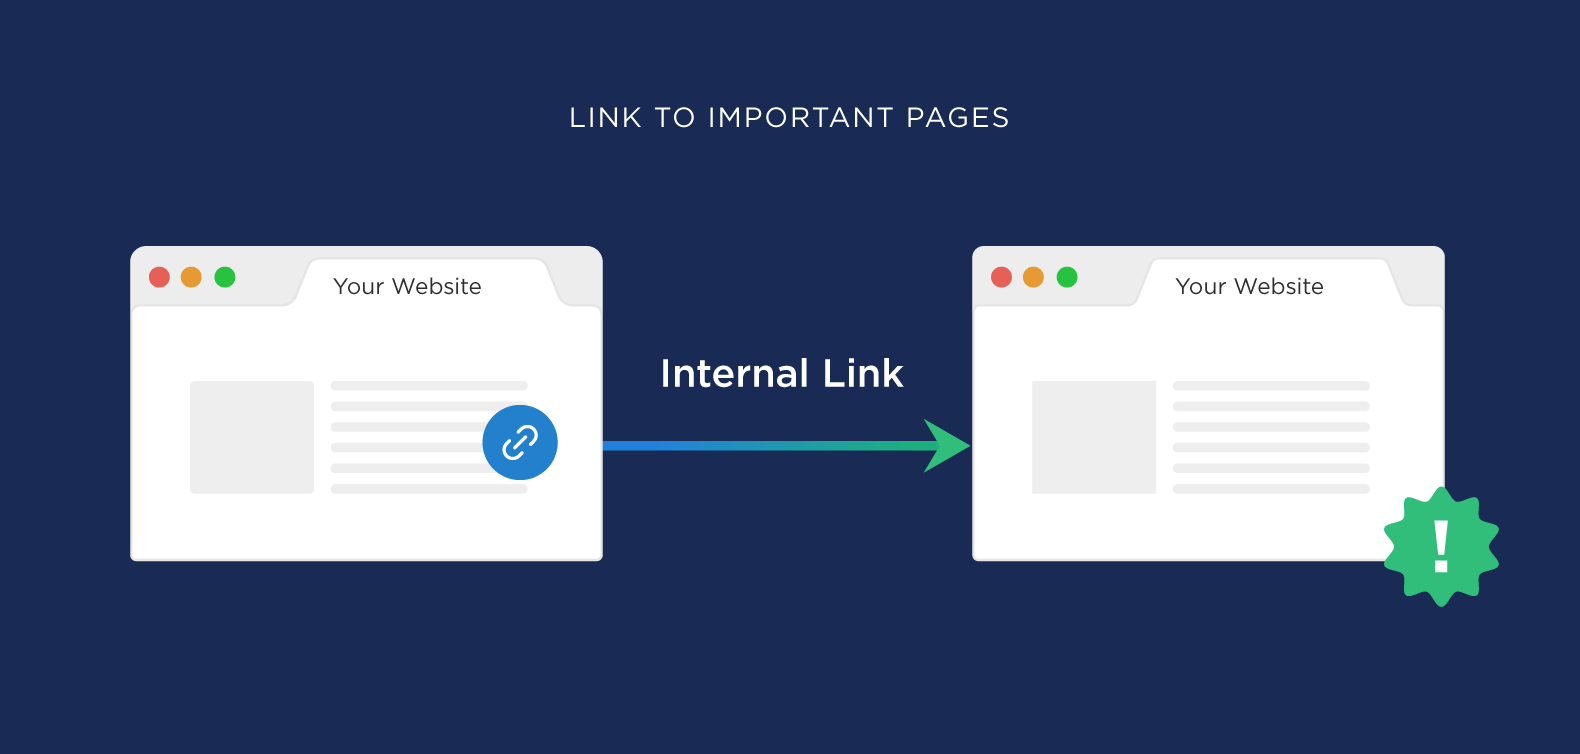 Always use internal links in every post